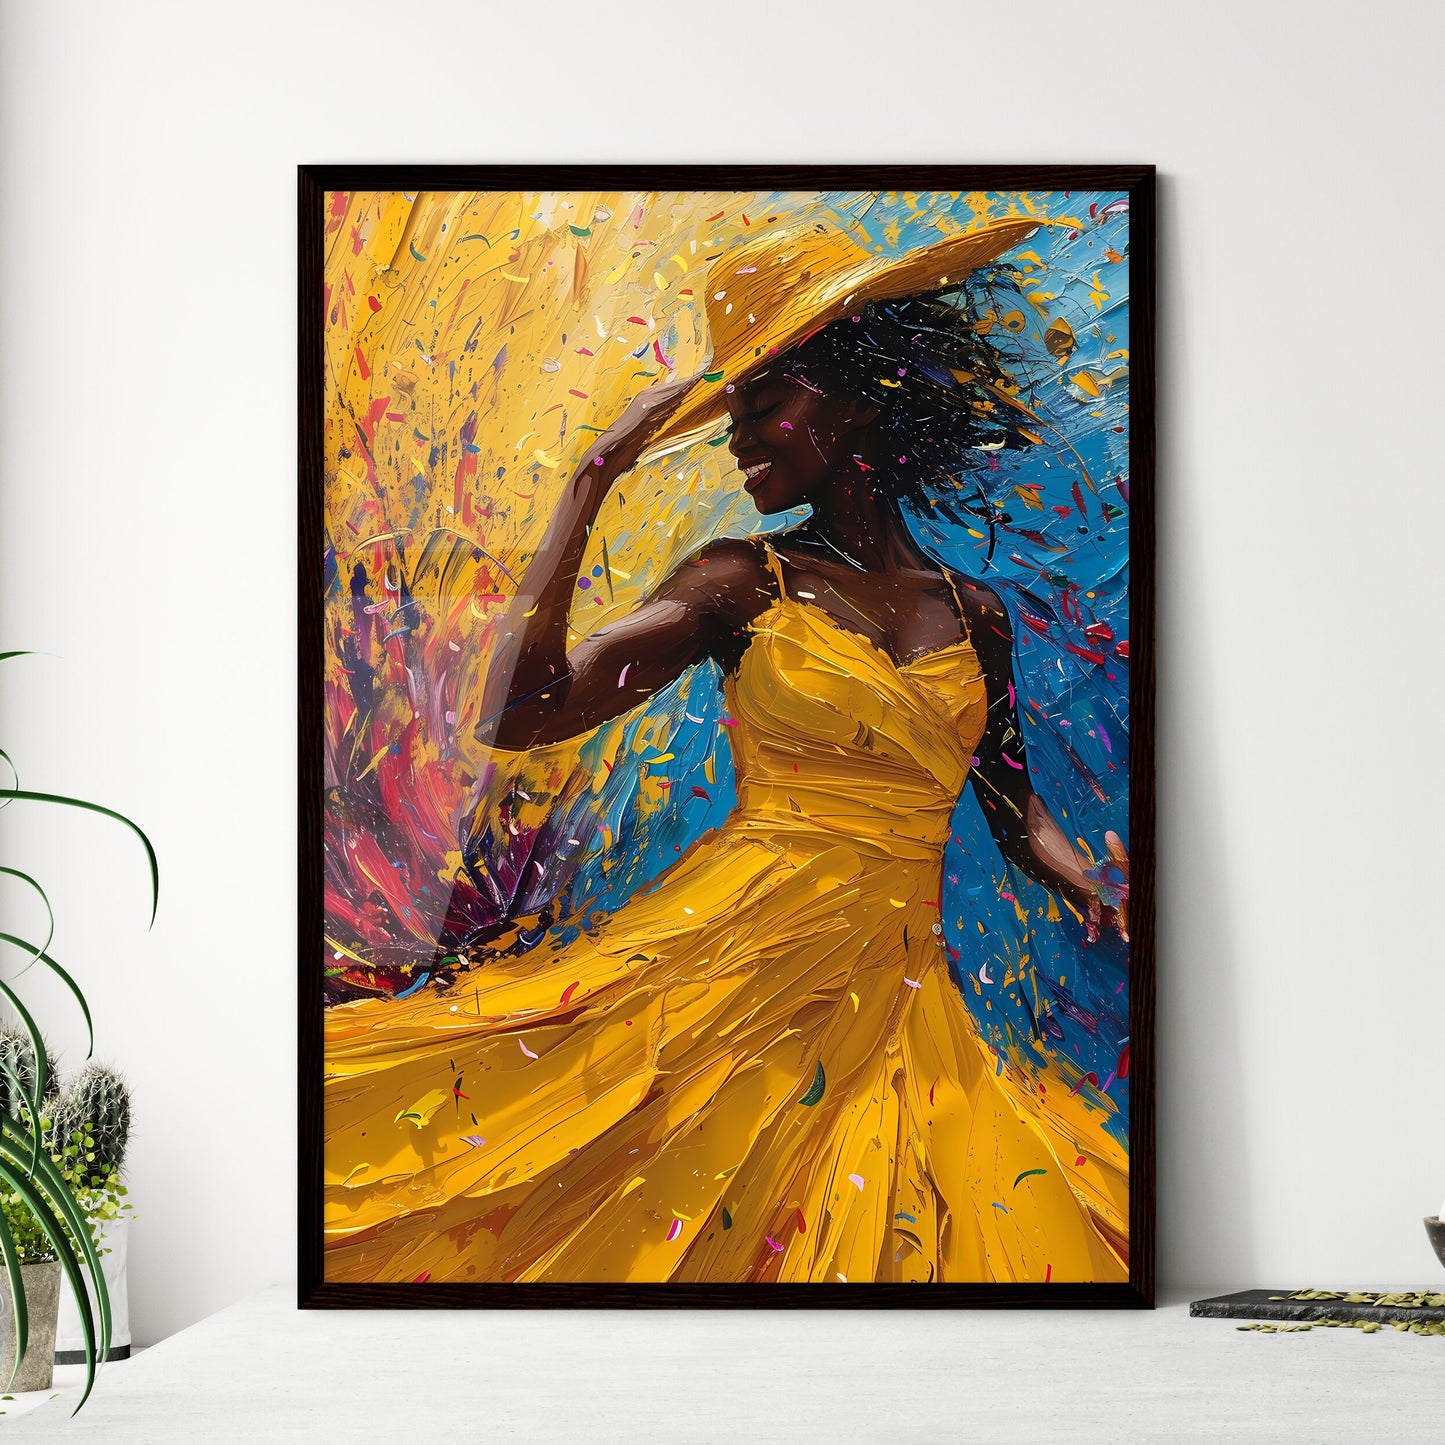 Immerse Yourself in the Painted Carnival: Vibrant Brazilian Woman Dancing in Yellow Dress and Hat Default Title